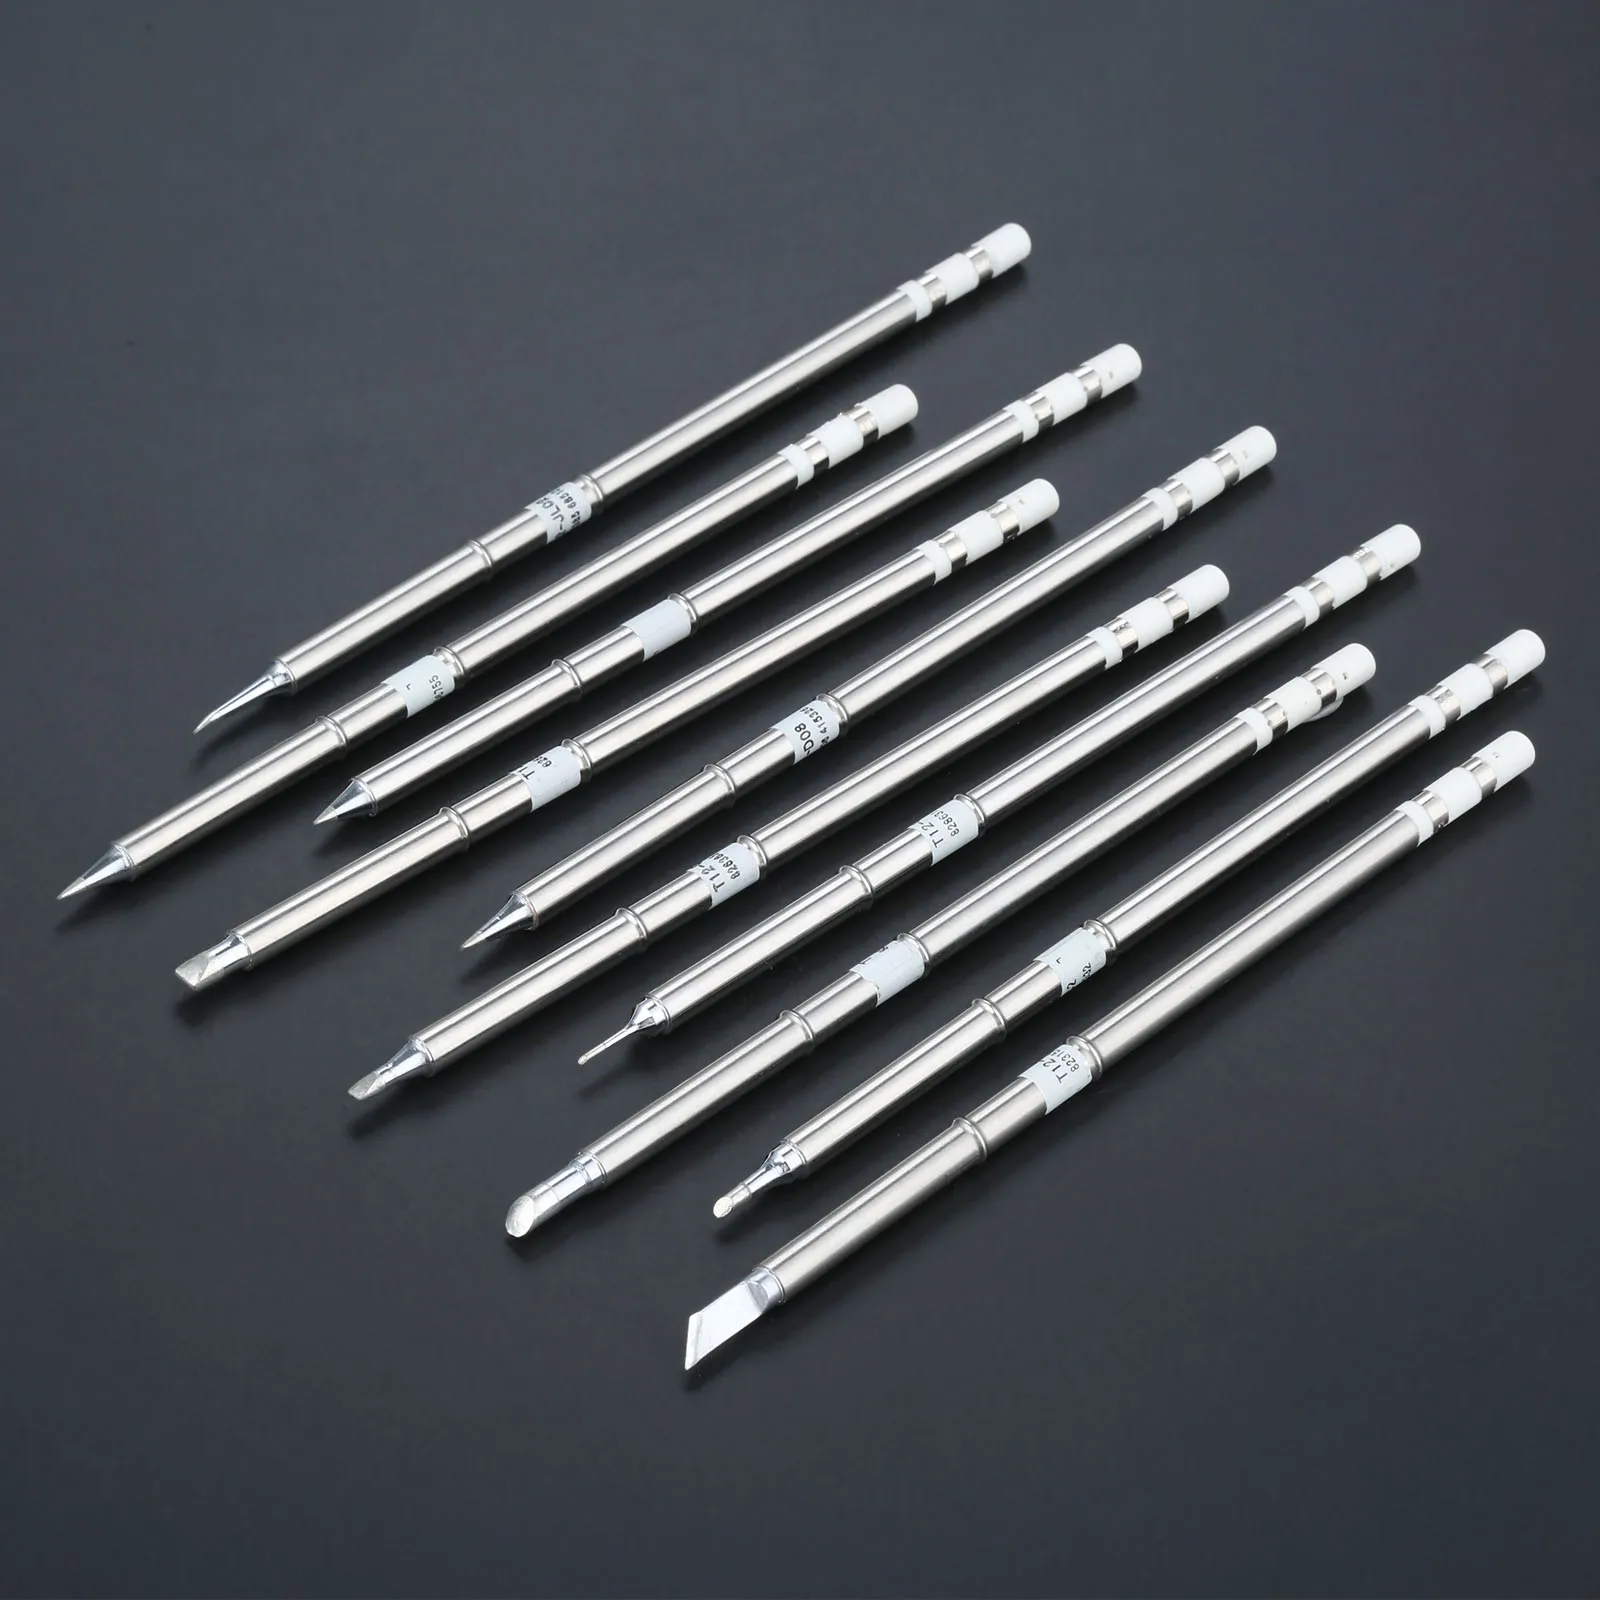 

1pc Iron Soldering Tip T12-D12/D16/D24/DL32/D52/C1/C4/CF4/BC1/BC1.5 for FX-950 FM-202 Series Soldering Rework Station Replace